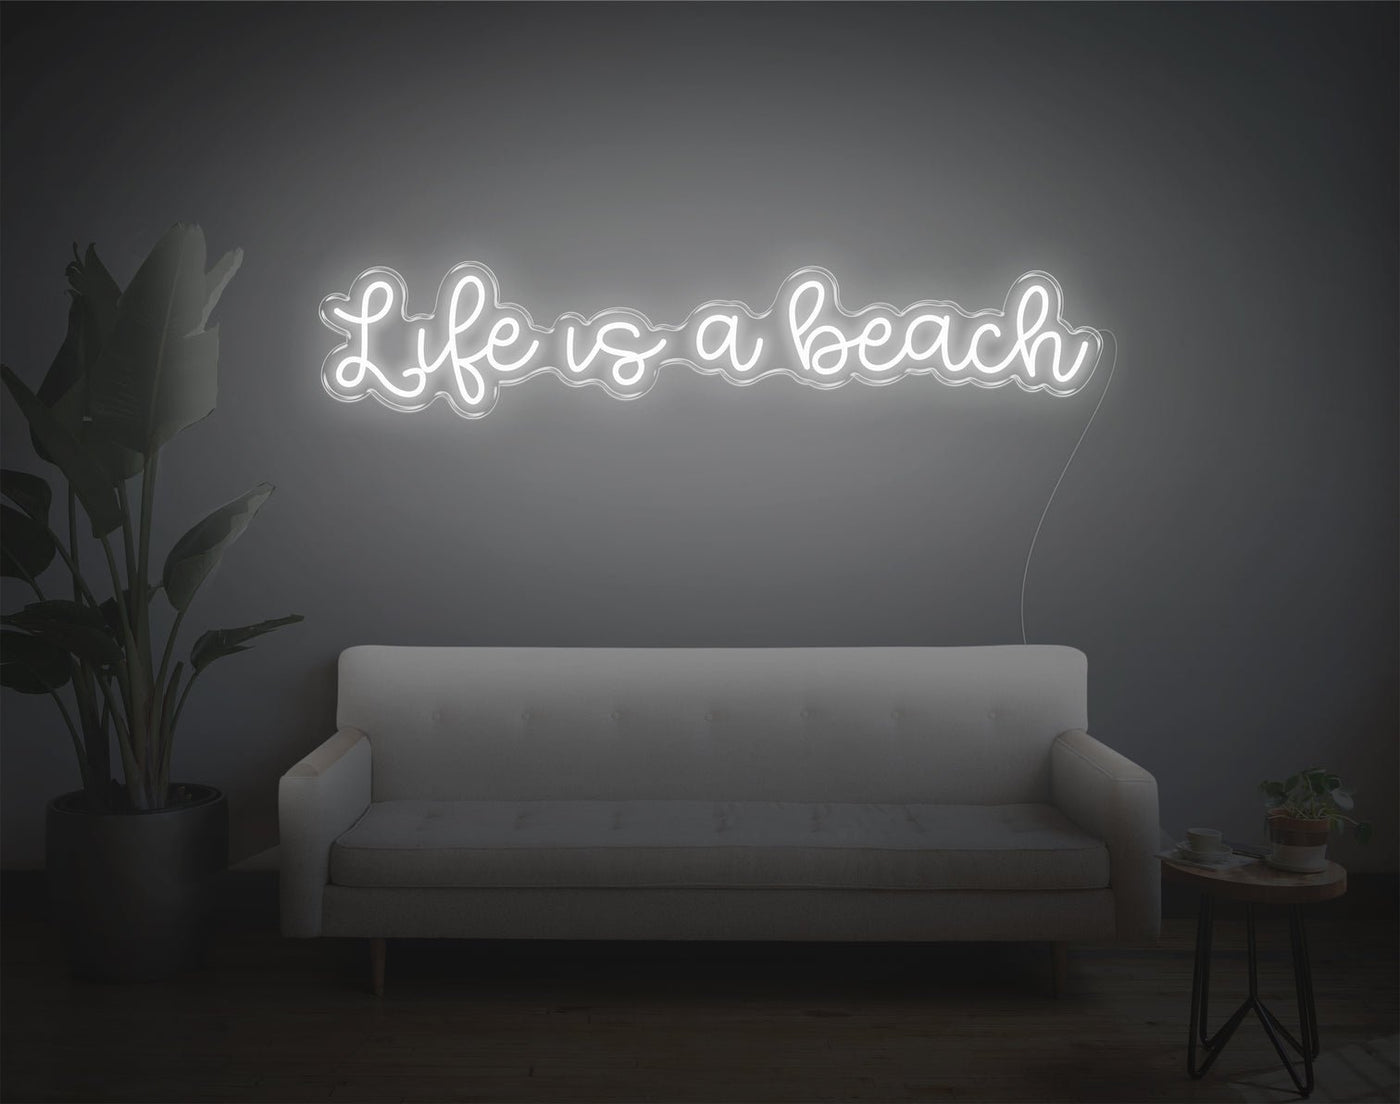 Life is a beach LED Neon Sign - 28inch x 7inchWhite